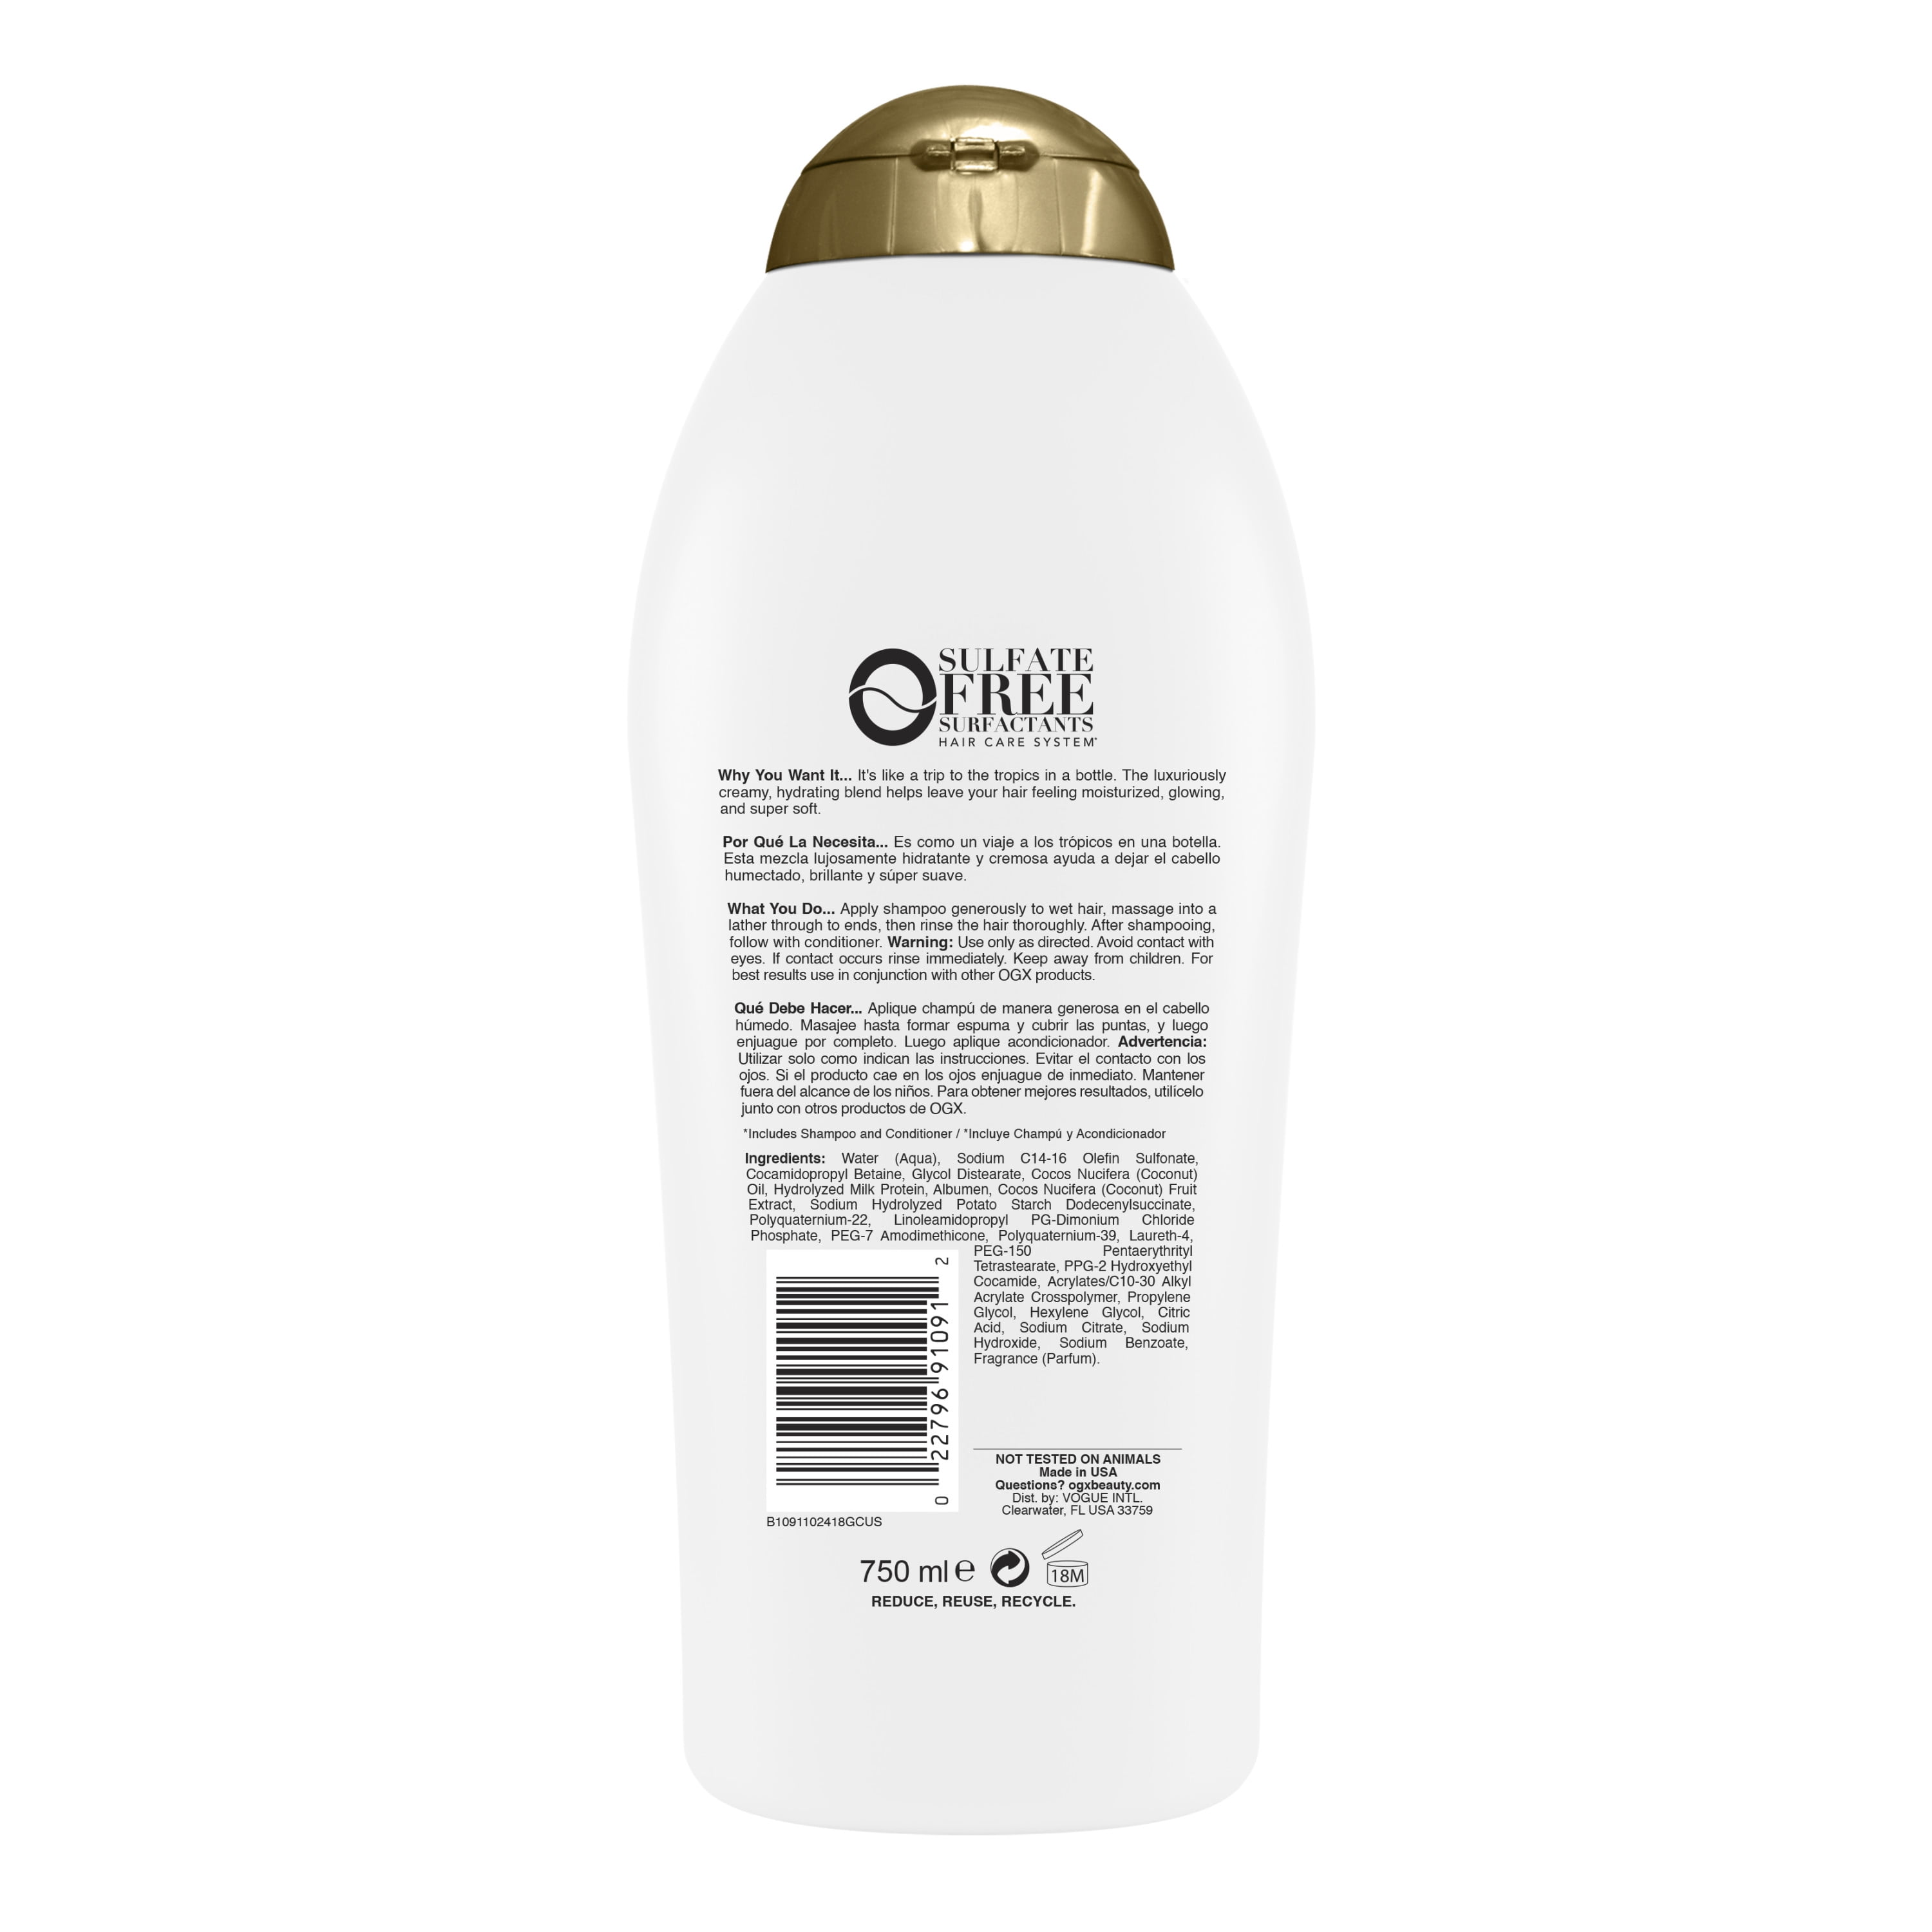 OGX Nourishing + Coconut Milk Moisturizing Daily Shampoo for Strong & Healthy Hair with Egg White Protein, 25.4 fl - Walmart.com